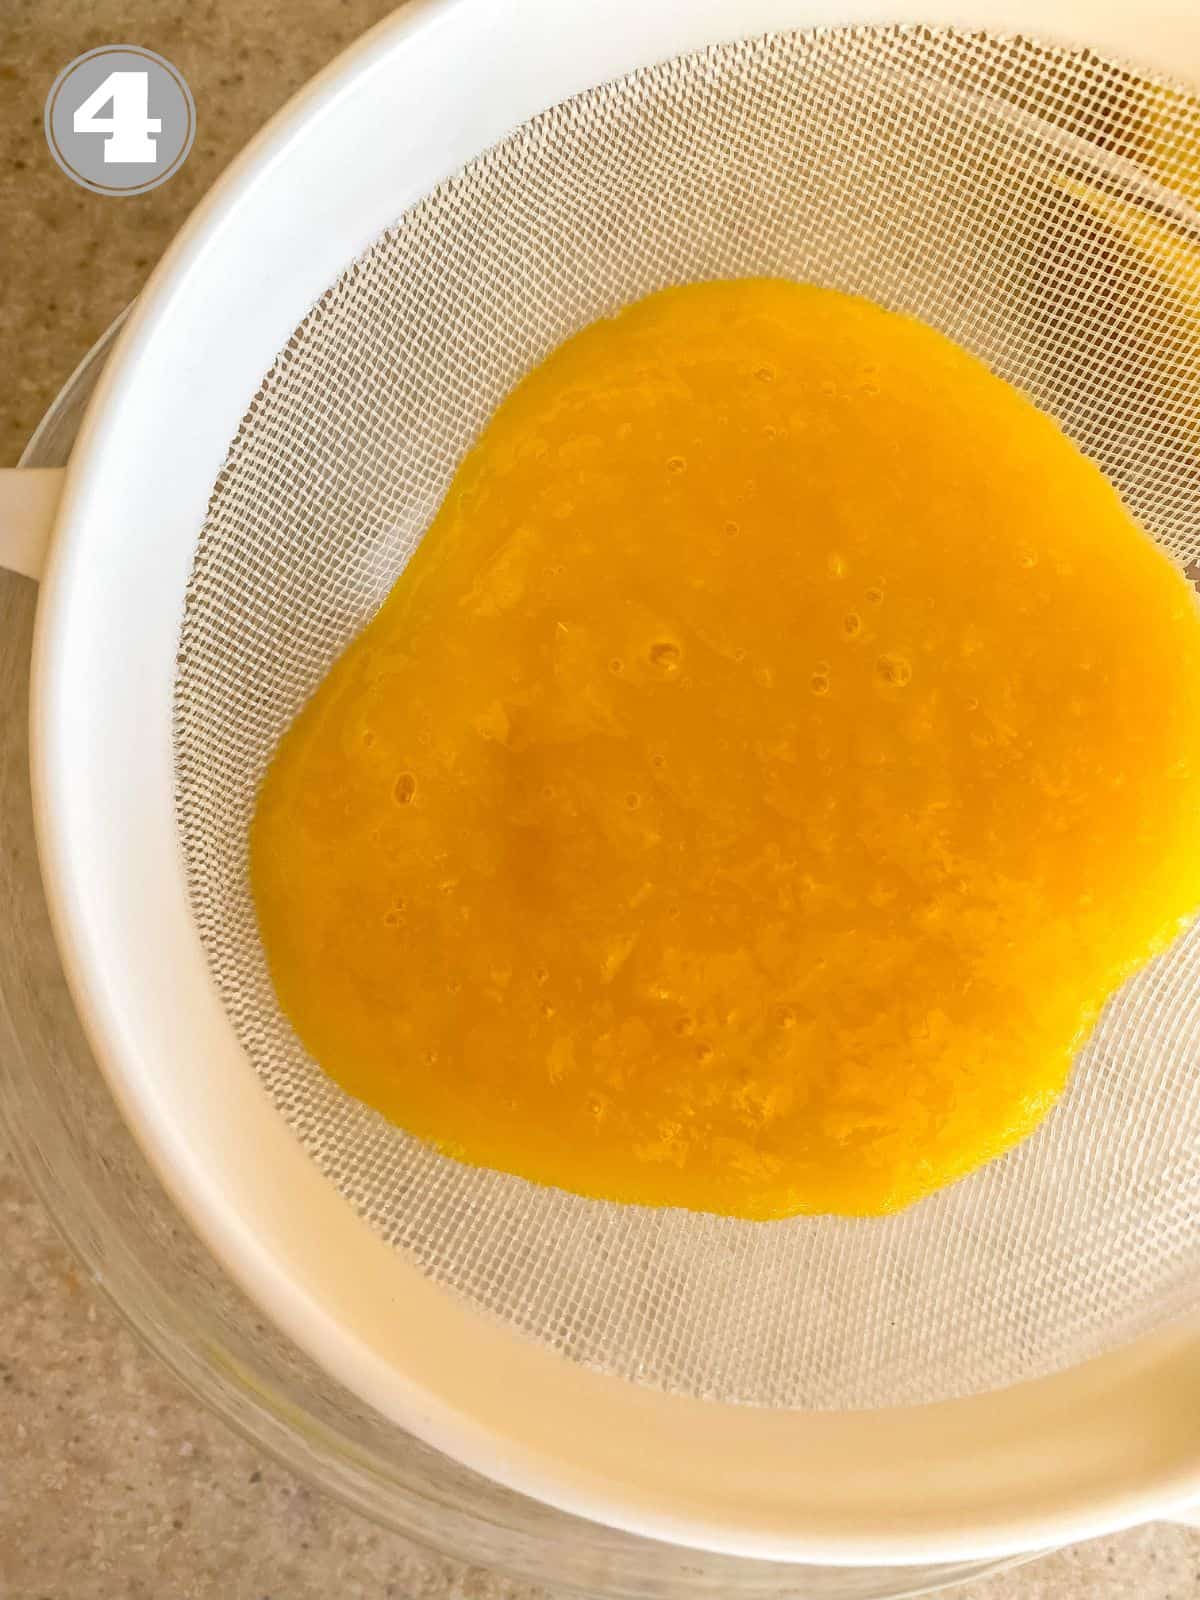 mango puree in a white sieve over a bowl labelled number four.